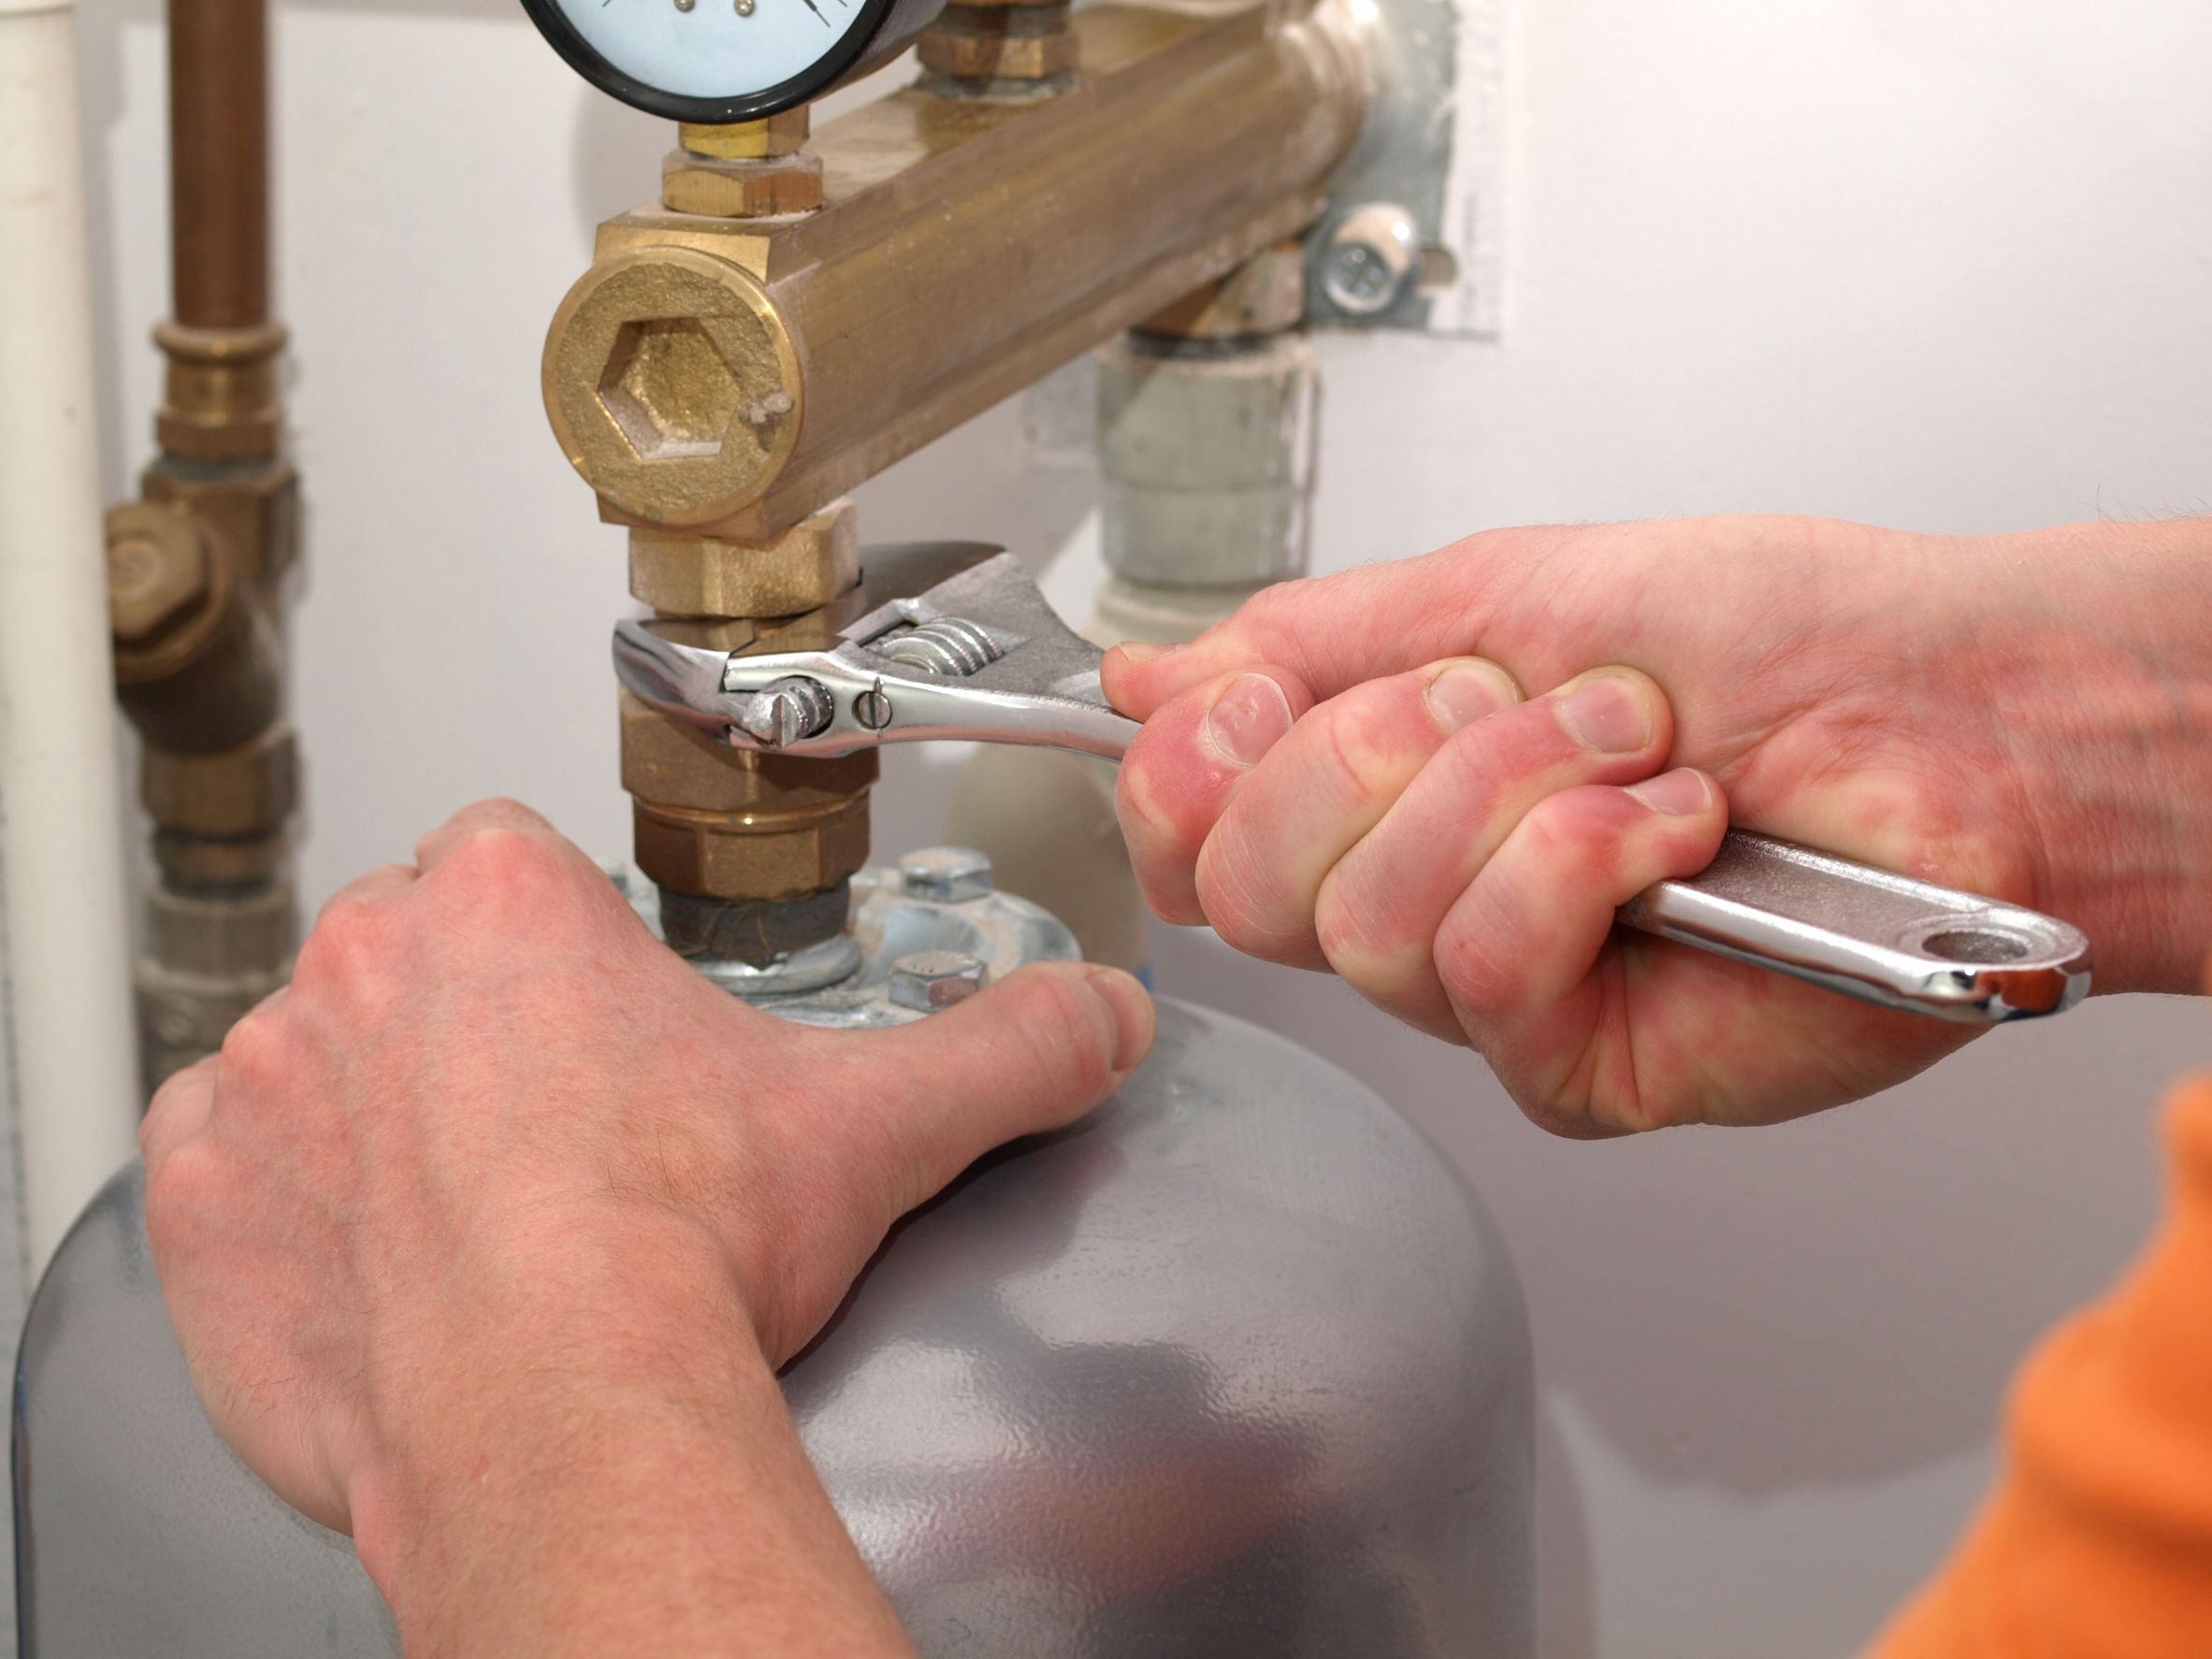 Hiring a Plumber? 4 Questions to Ask